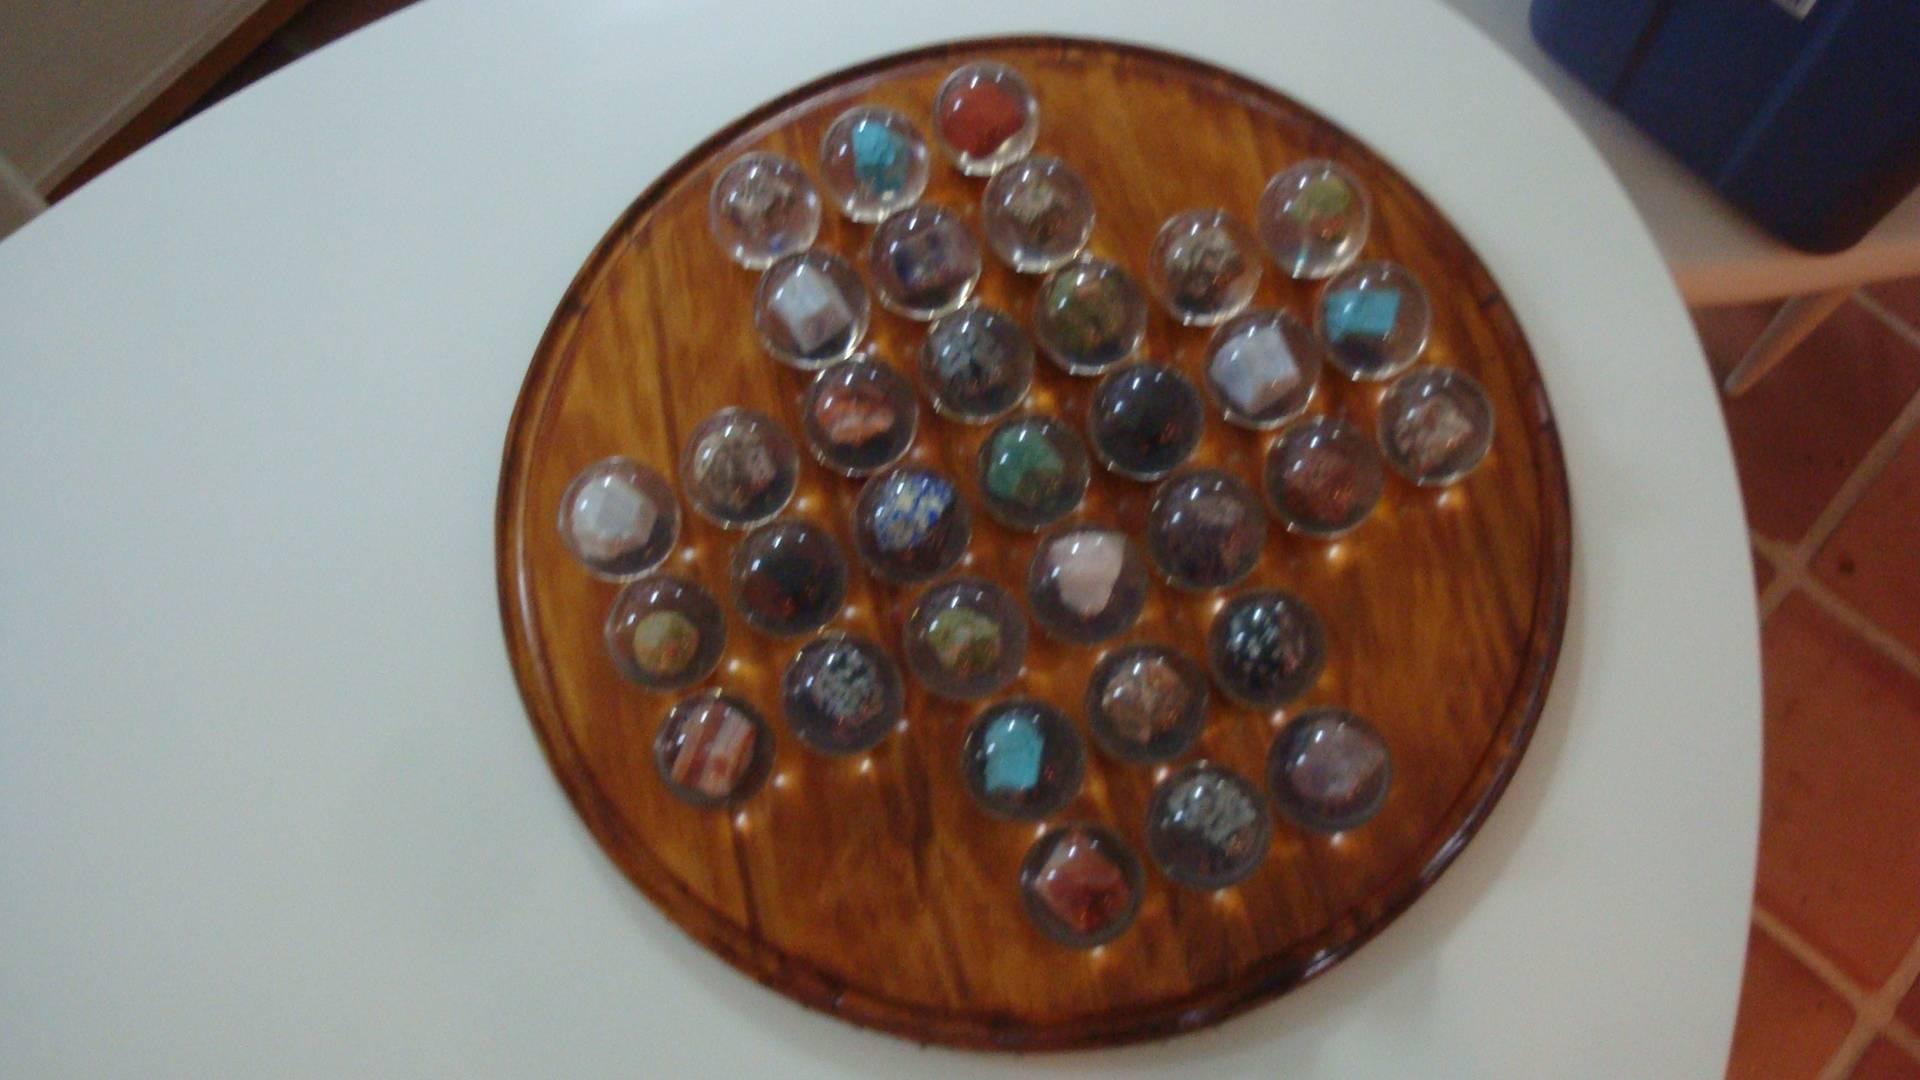 This is a large South African (Lucite marble embedded with different geodes) board game of Solitaire. The wood board has indented areas for each marble
33 balls included.